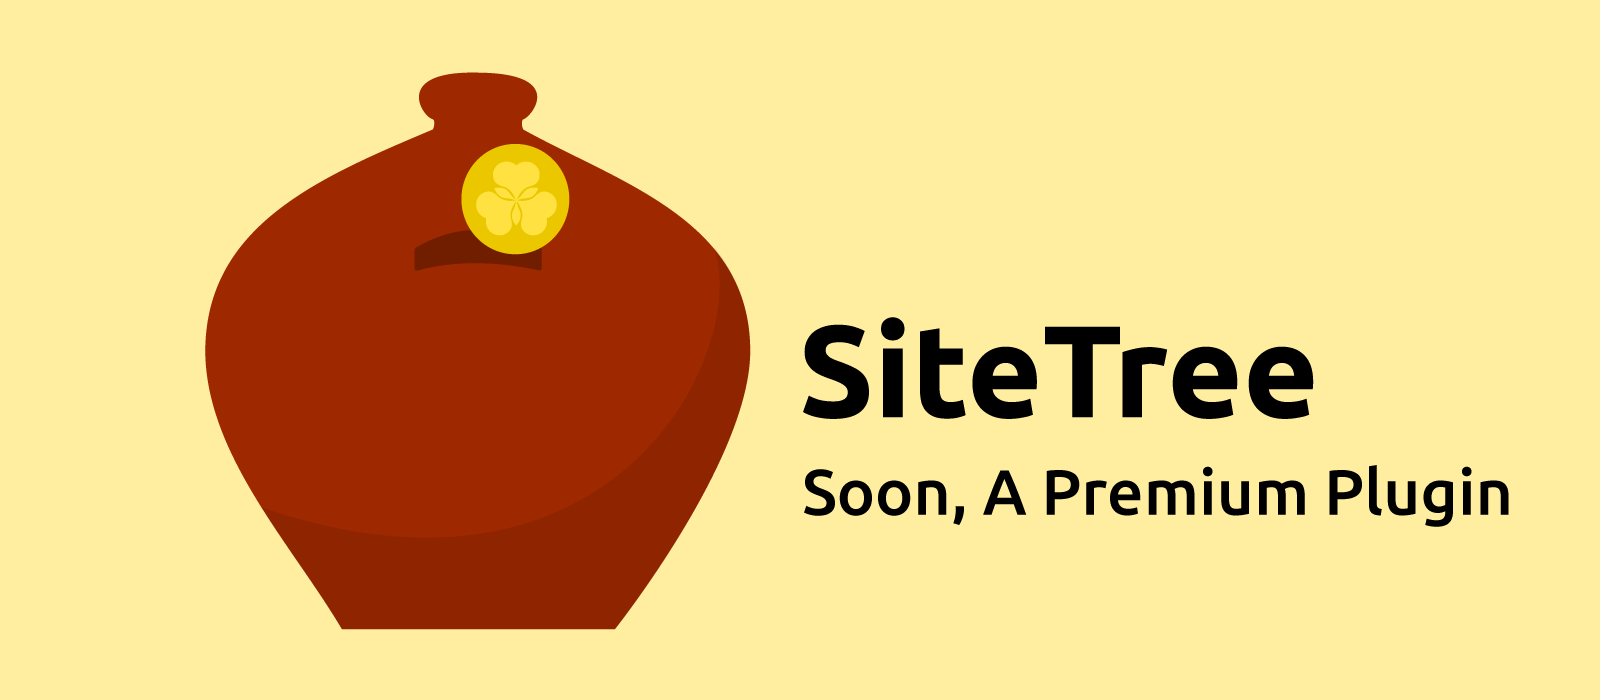 SiteTree is About to Go Premium